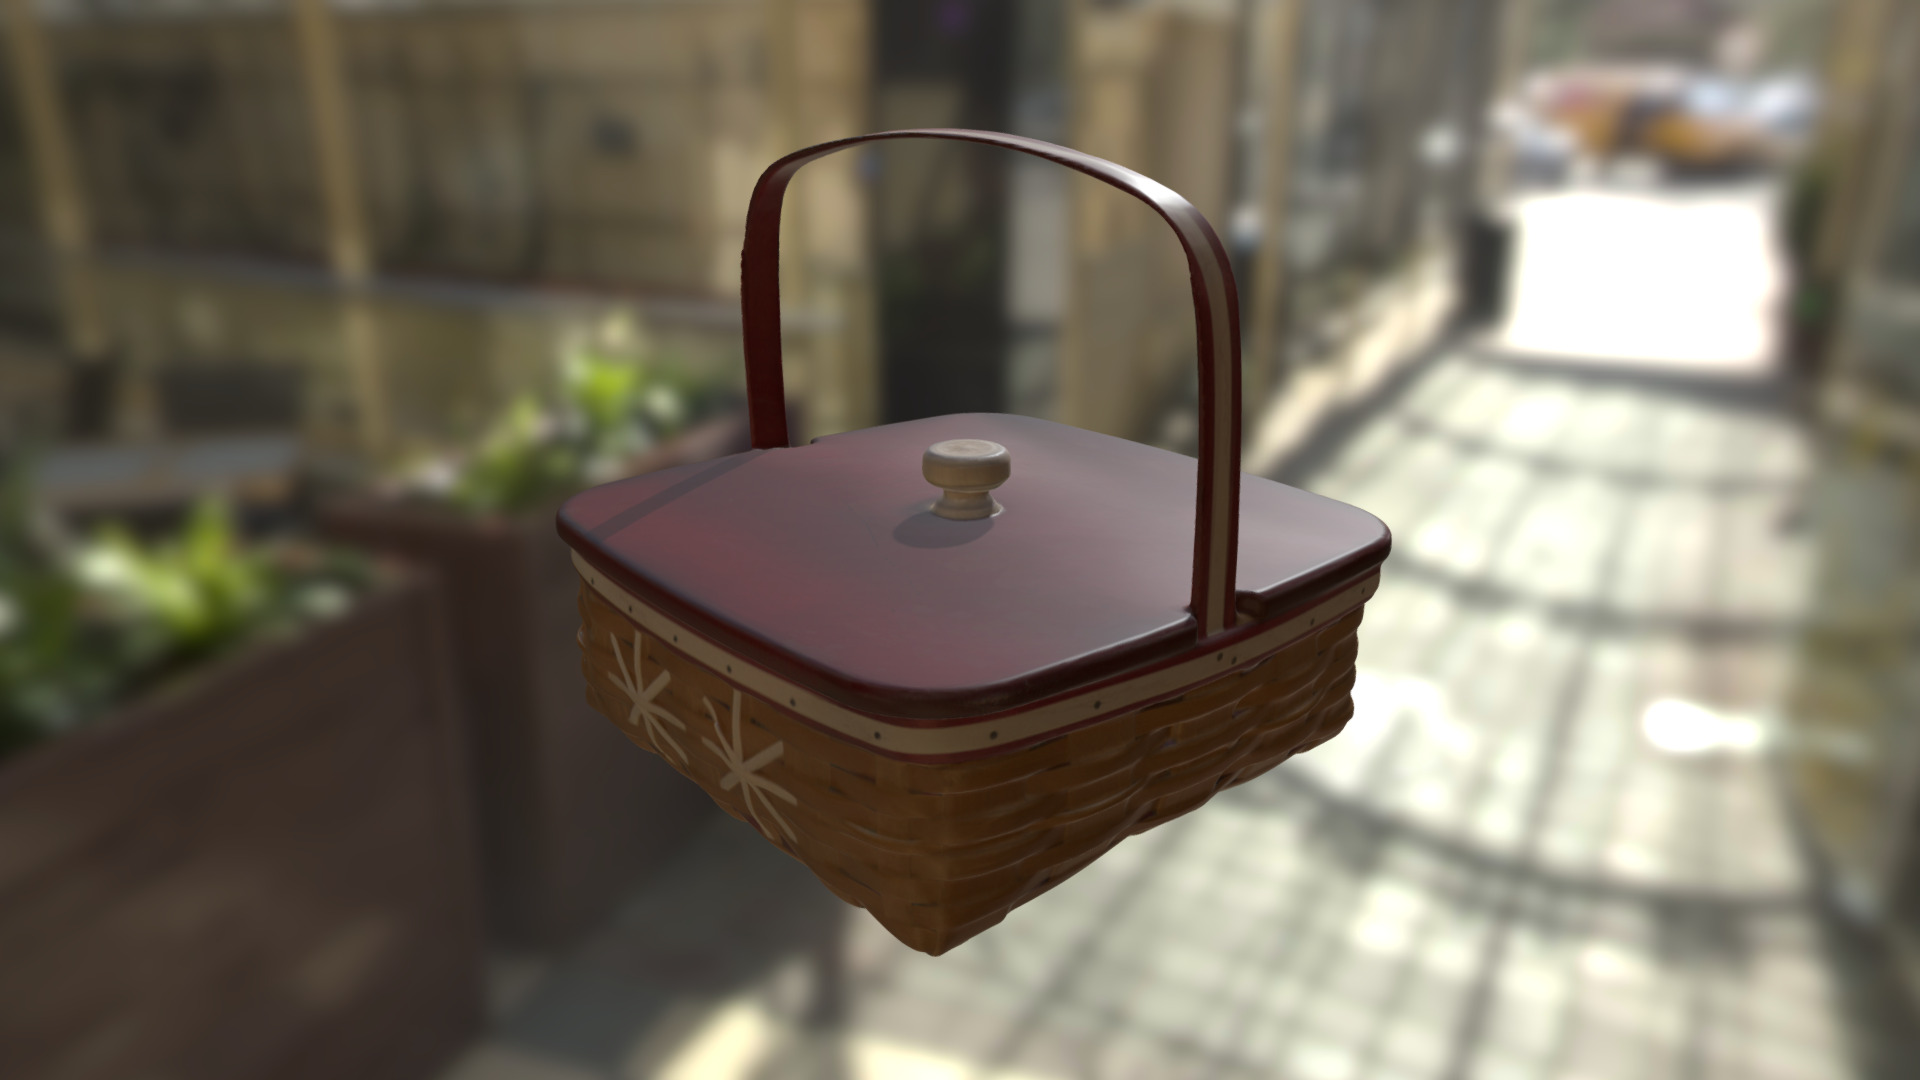 3D model Basket - This is a 3D model of the Basket. The 3D model is about a basket on a table.